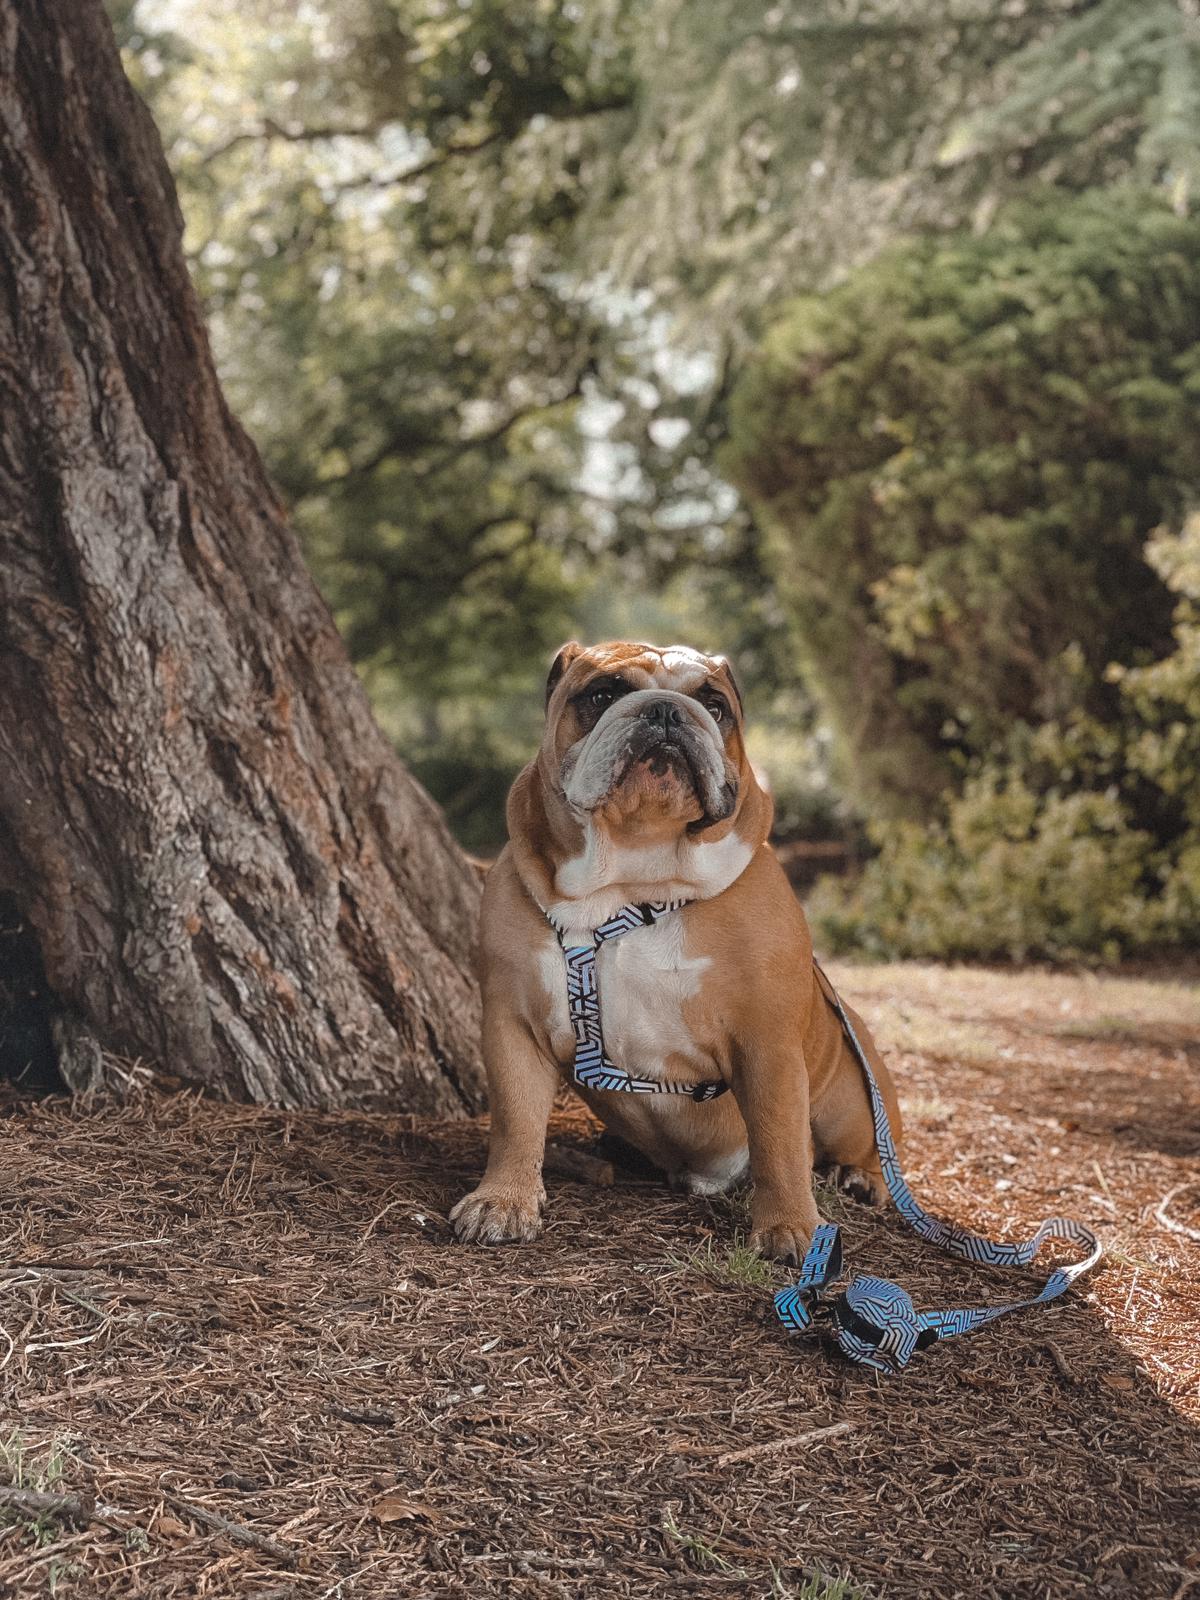 Bulldog wearing a TopDog Harnesses It's Just an Illusion Strap dog harness, sitting next to a large tree